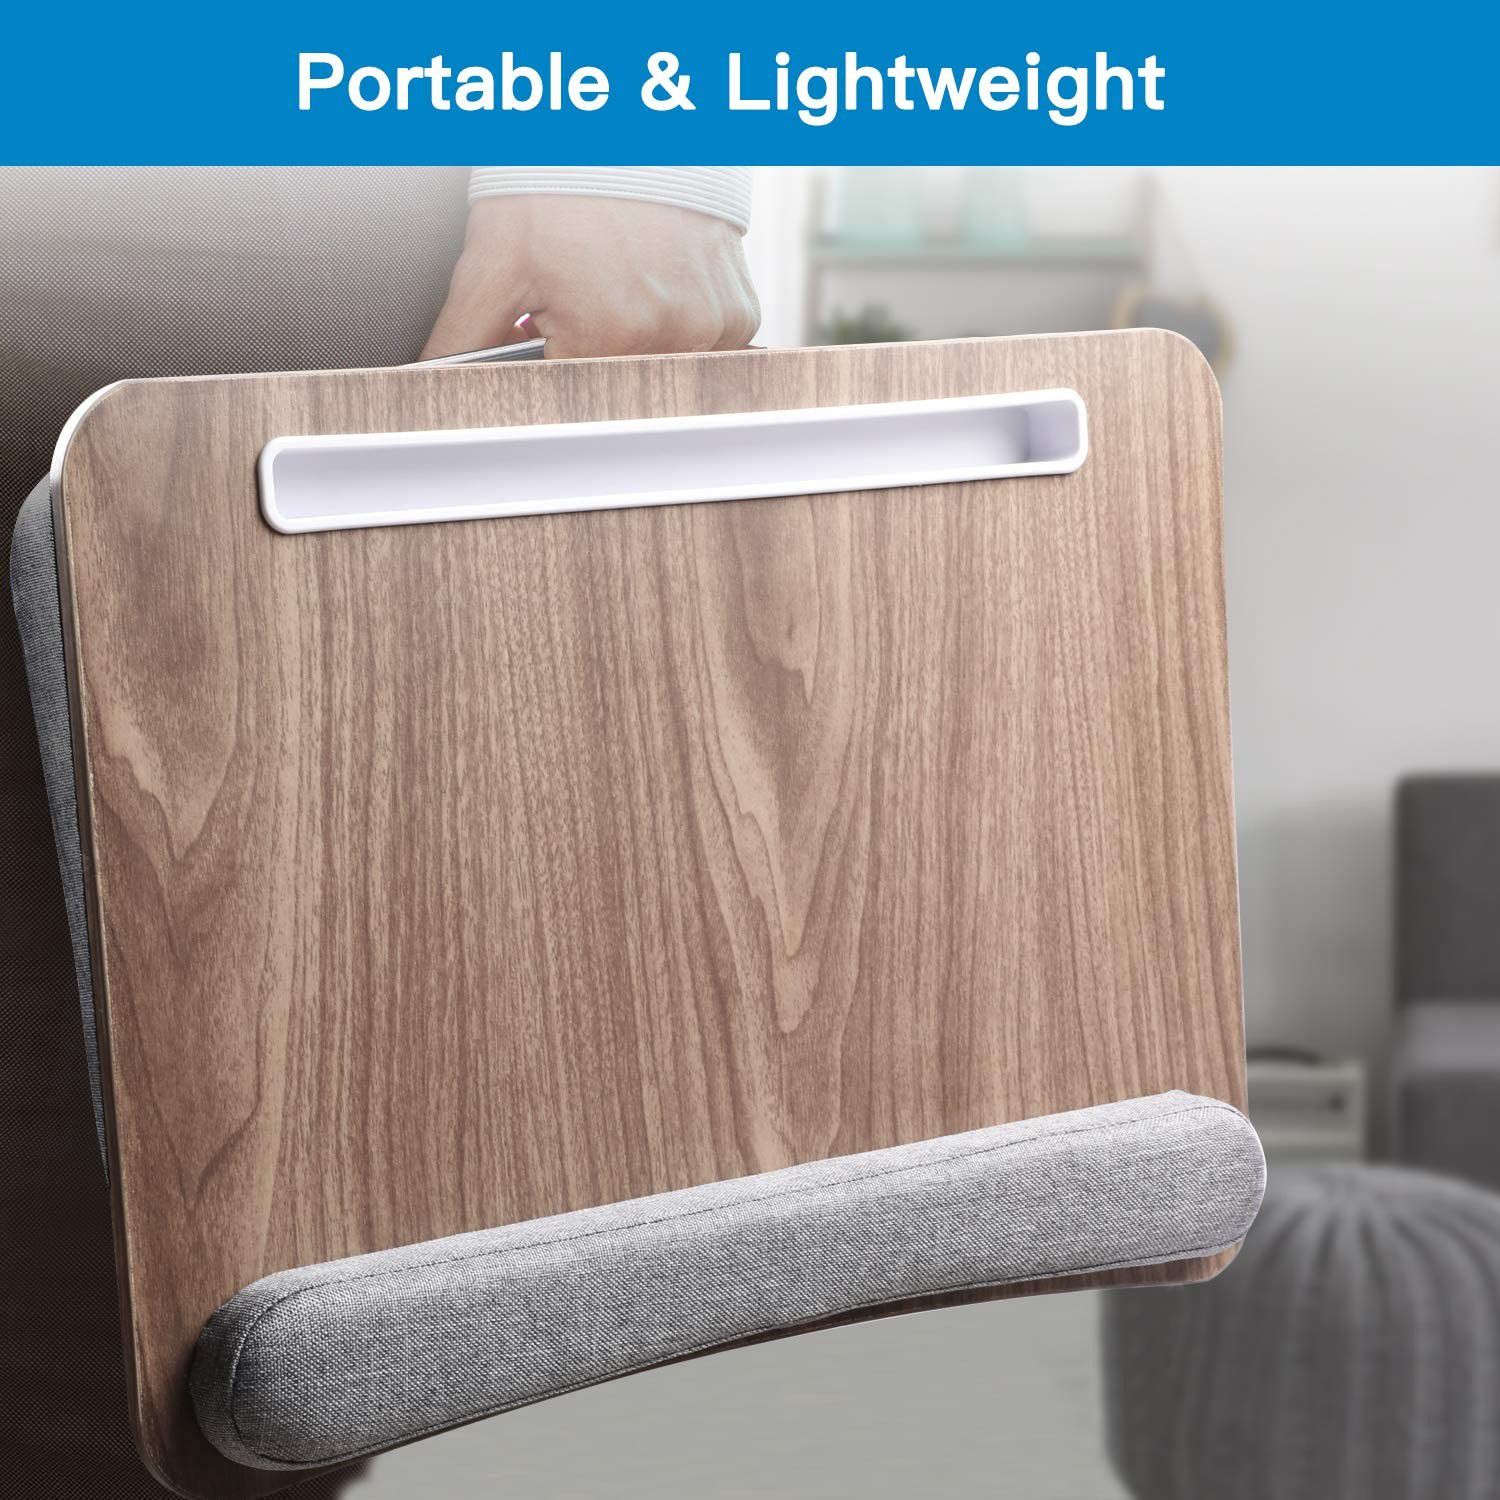 Lap Laptop Desk - Portable Lap Desk with Pillow Cushion, Fits up to 15.6 inch Laptop, with Anti-Slip Strip